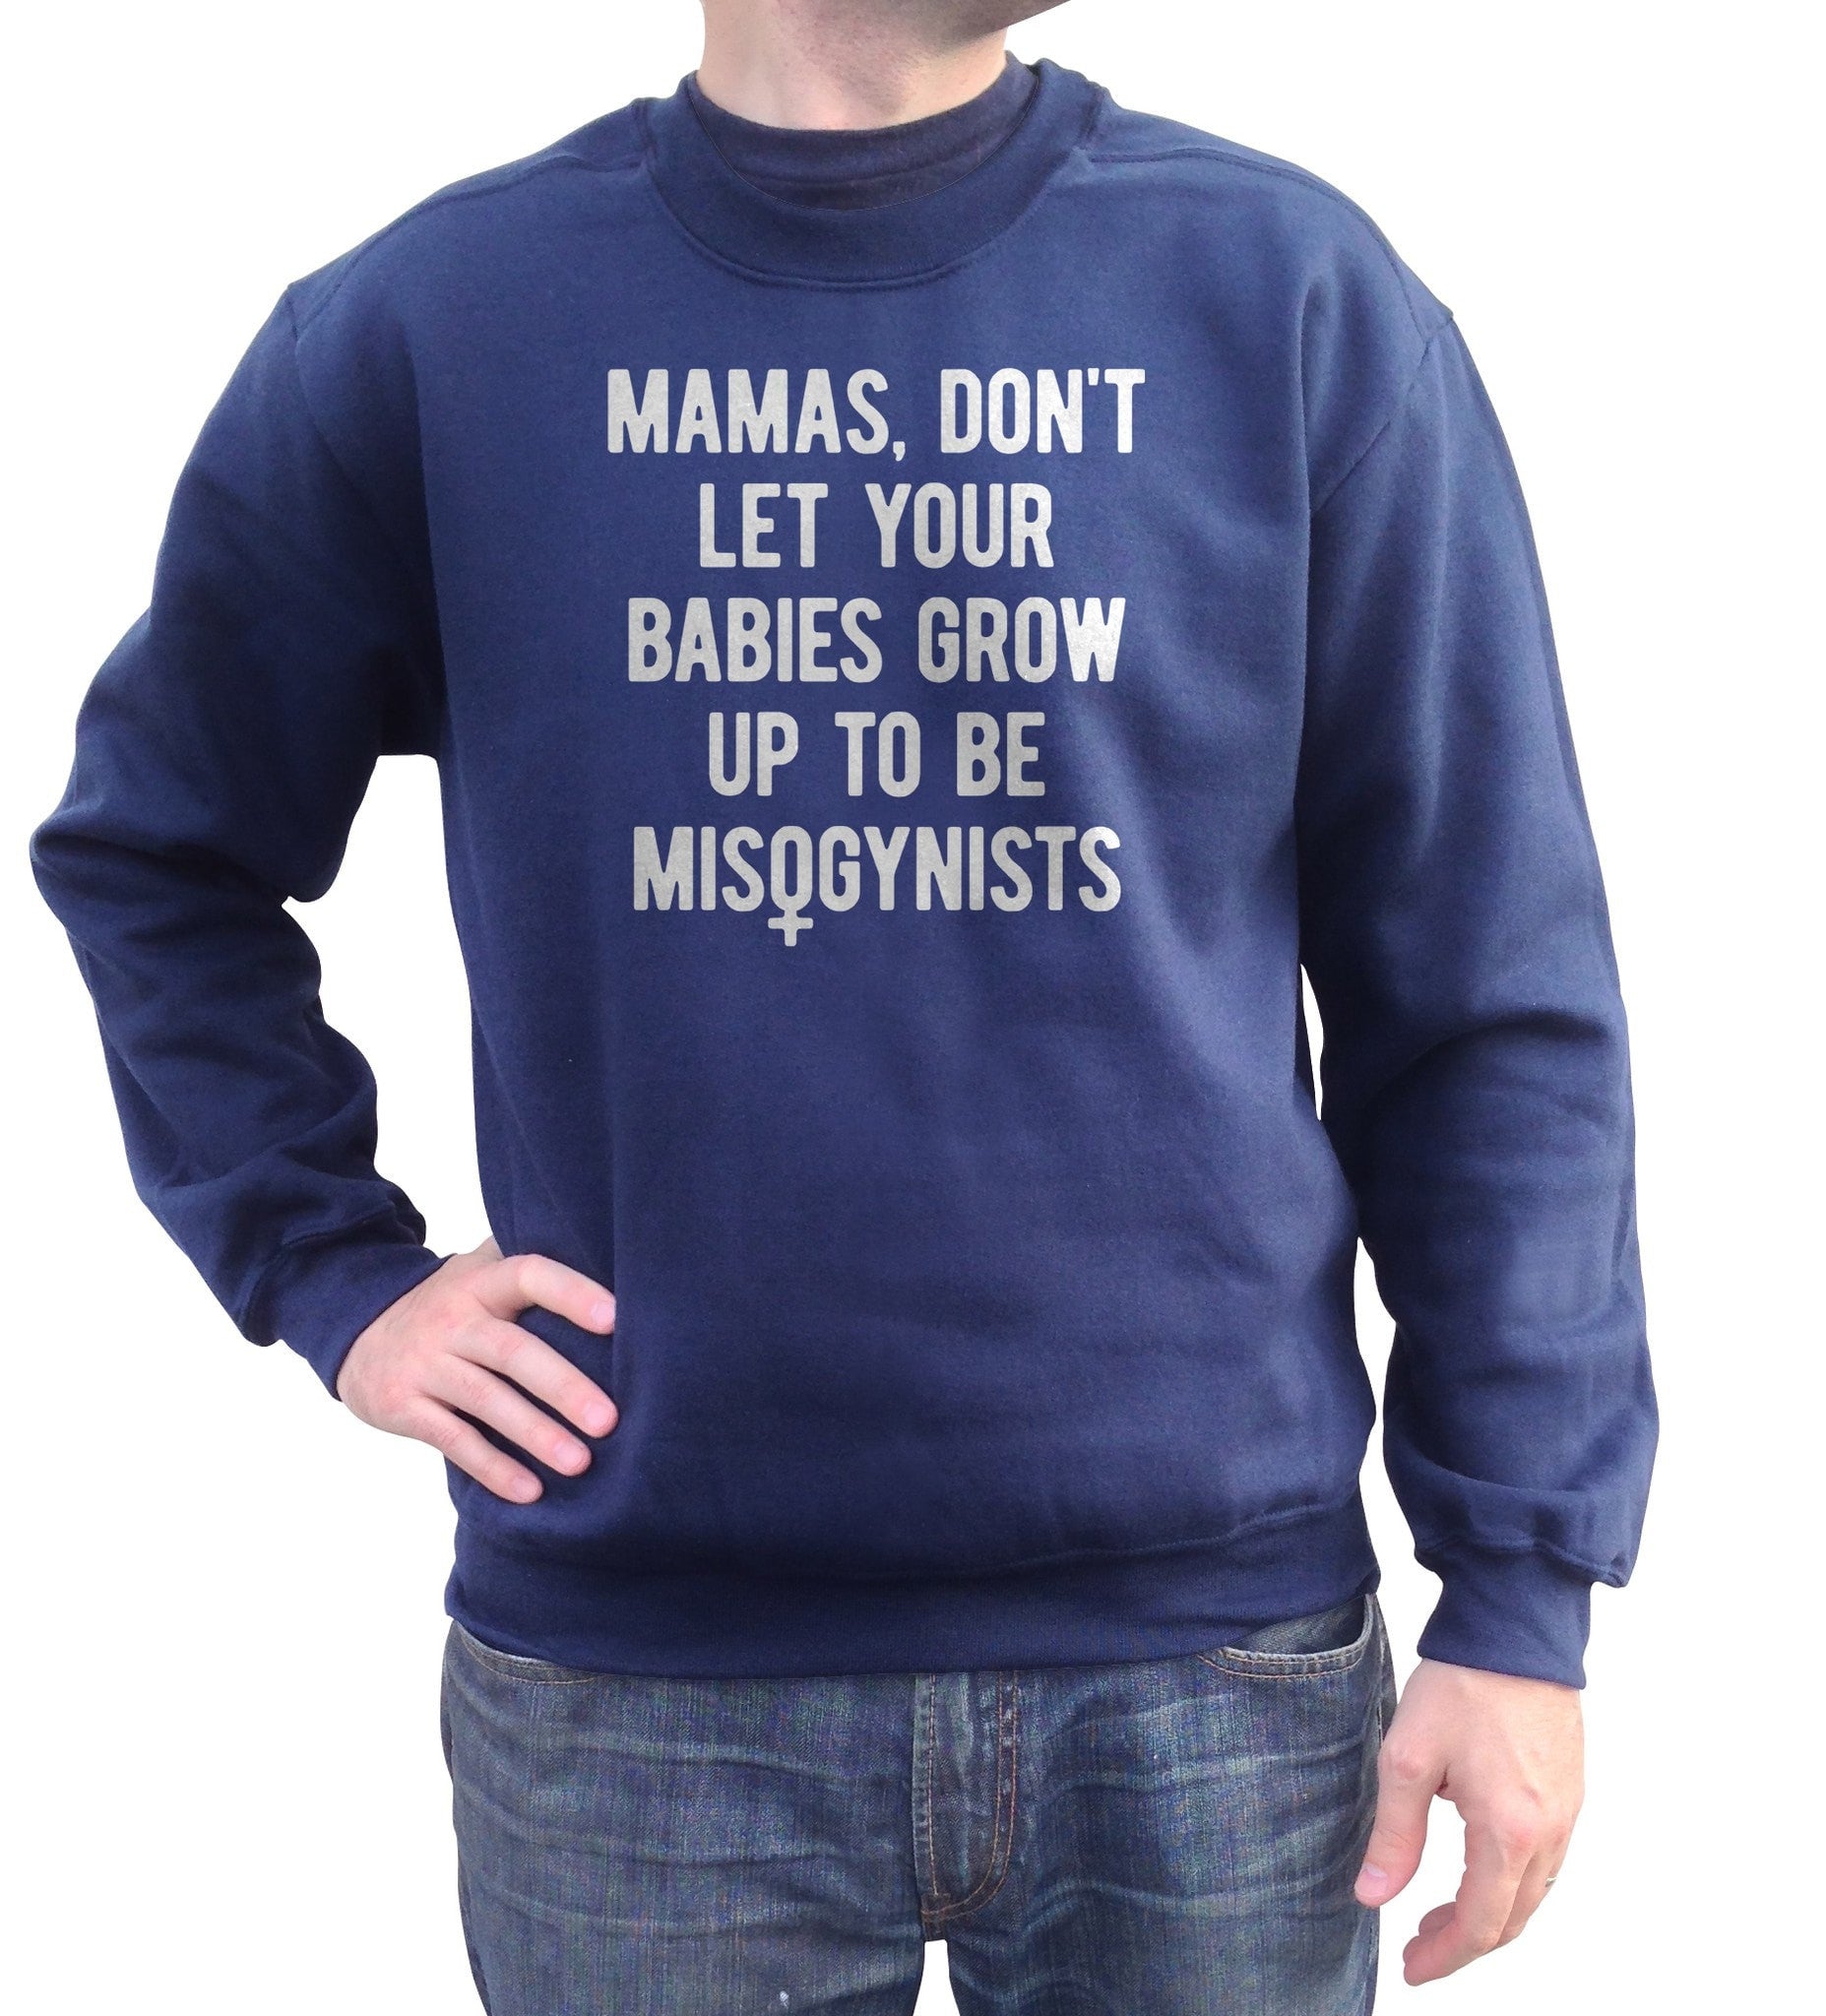 Unisex Mamas Don't Let Your Babies Grow Up to be Misogynists Sweatshirt